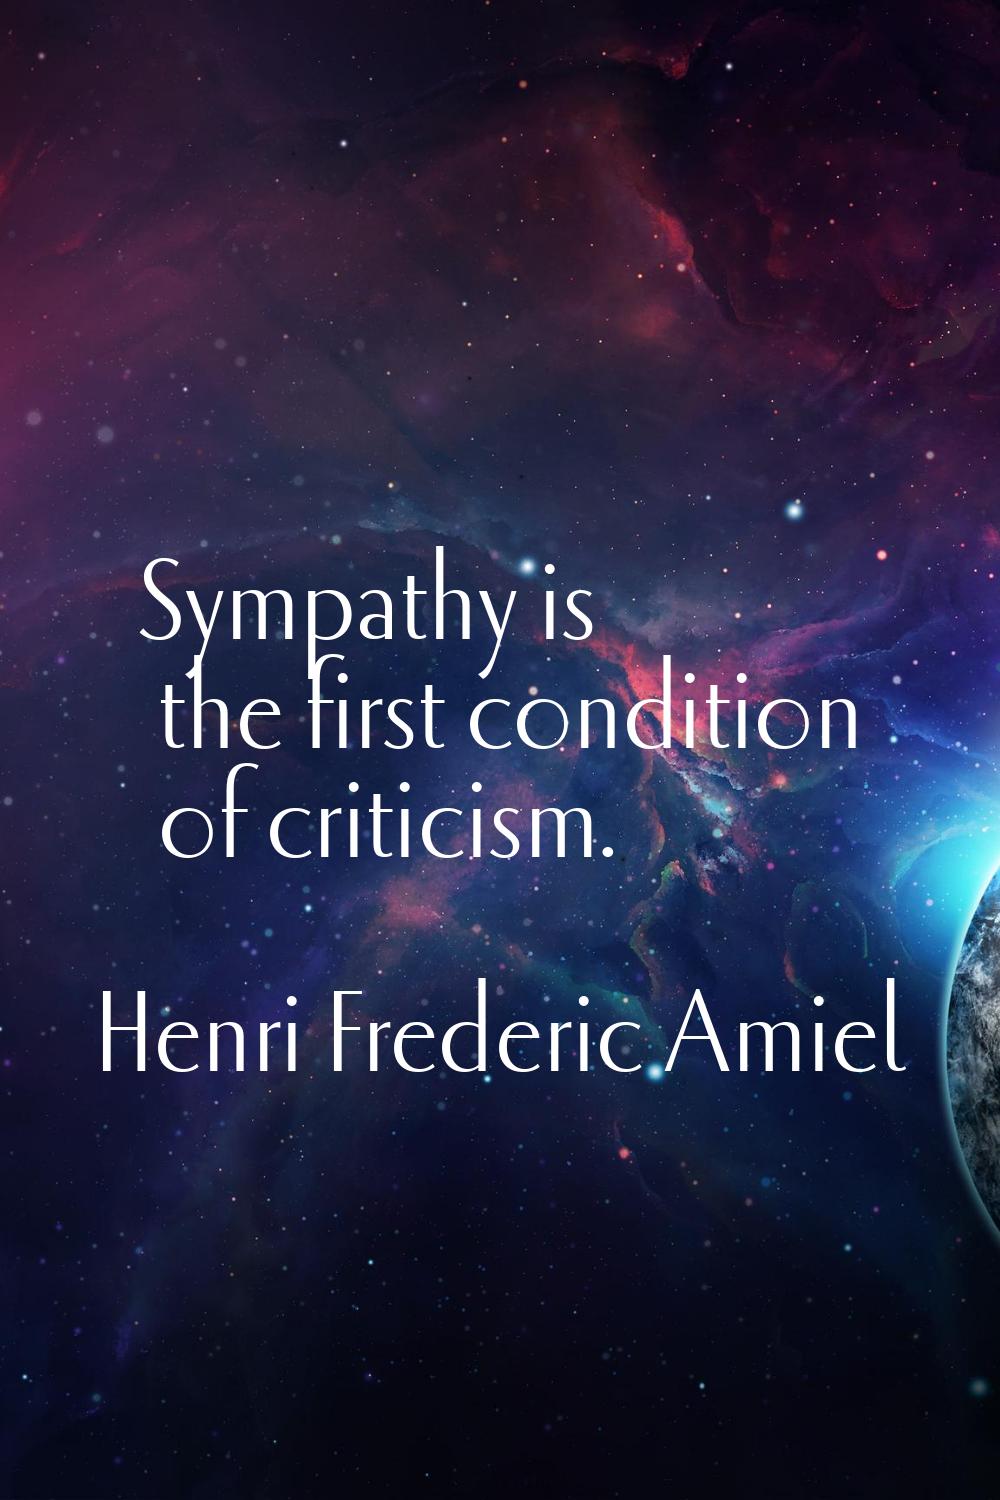 Sympathy is the first condition of criticism.